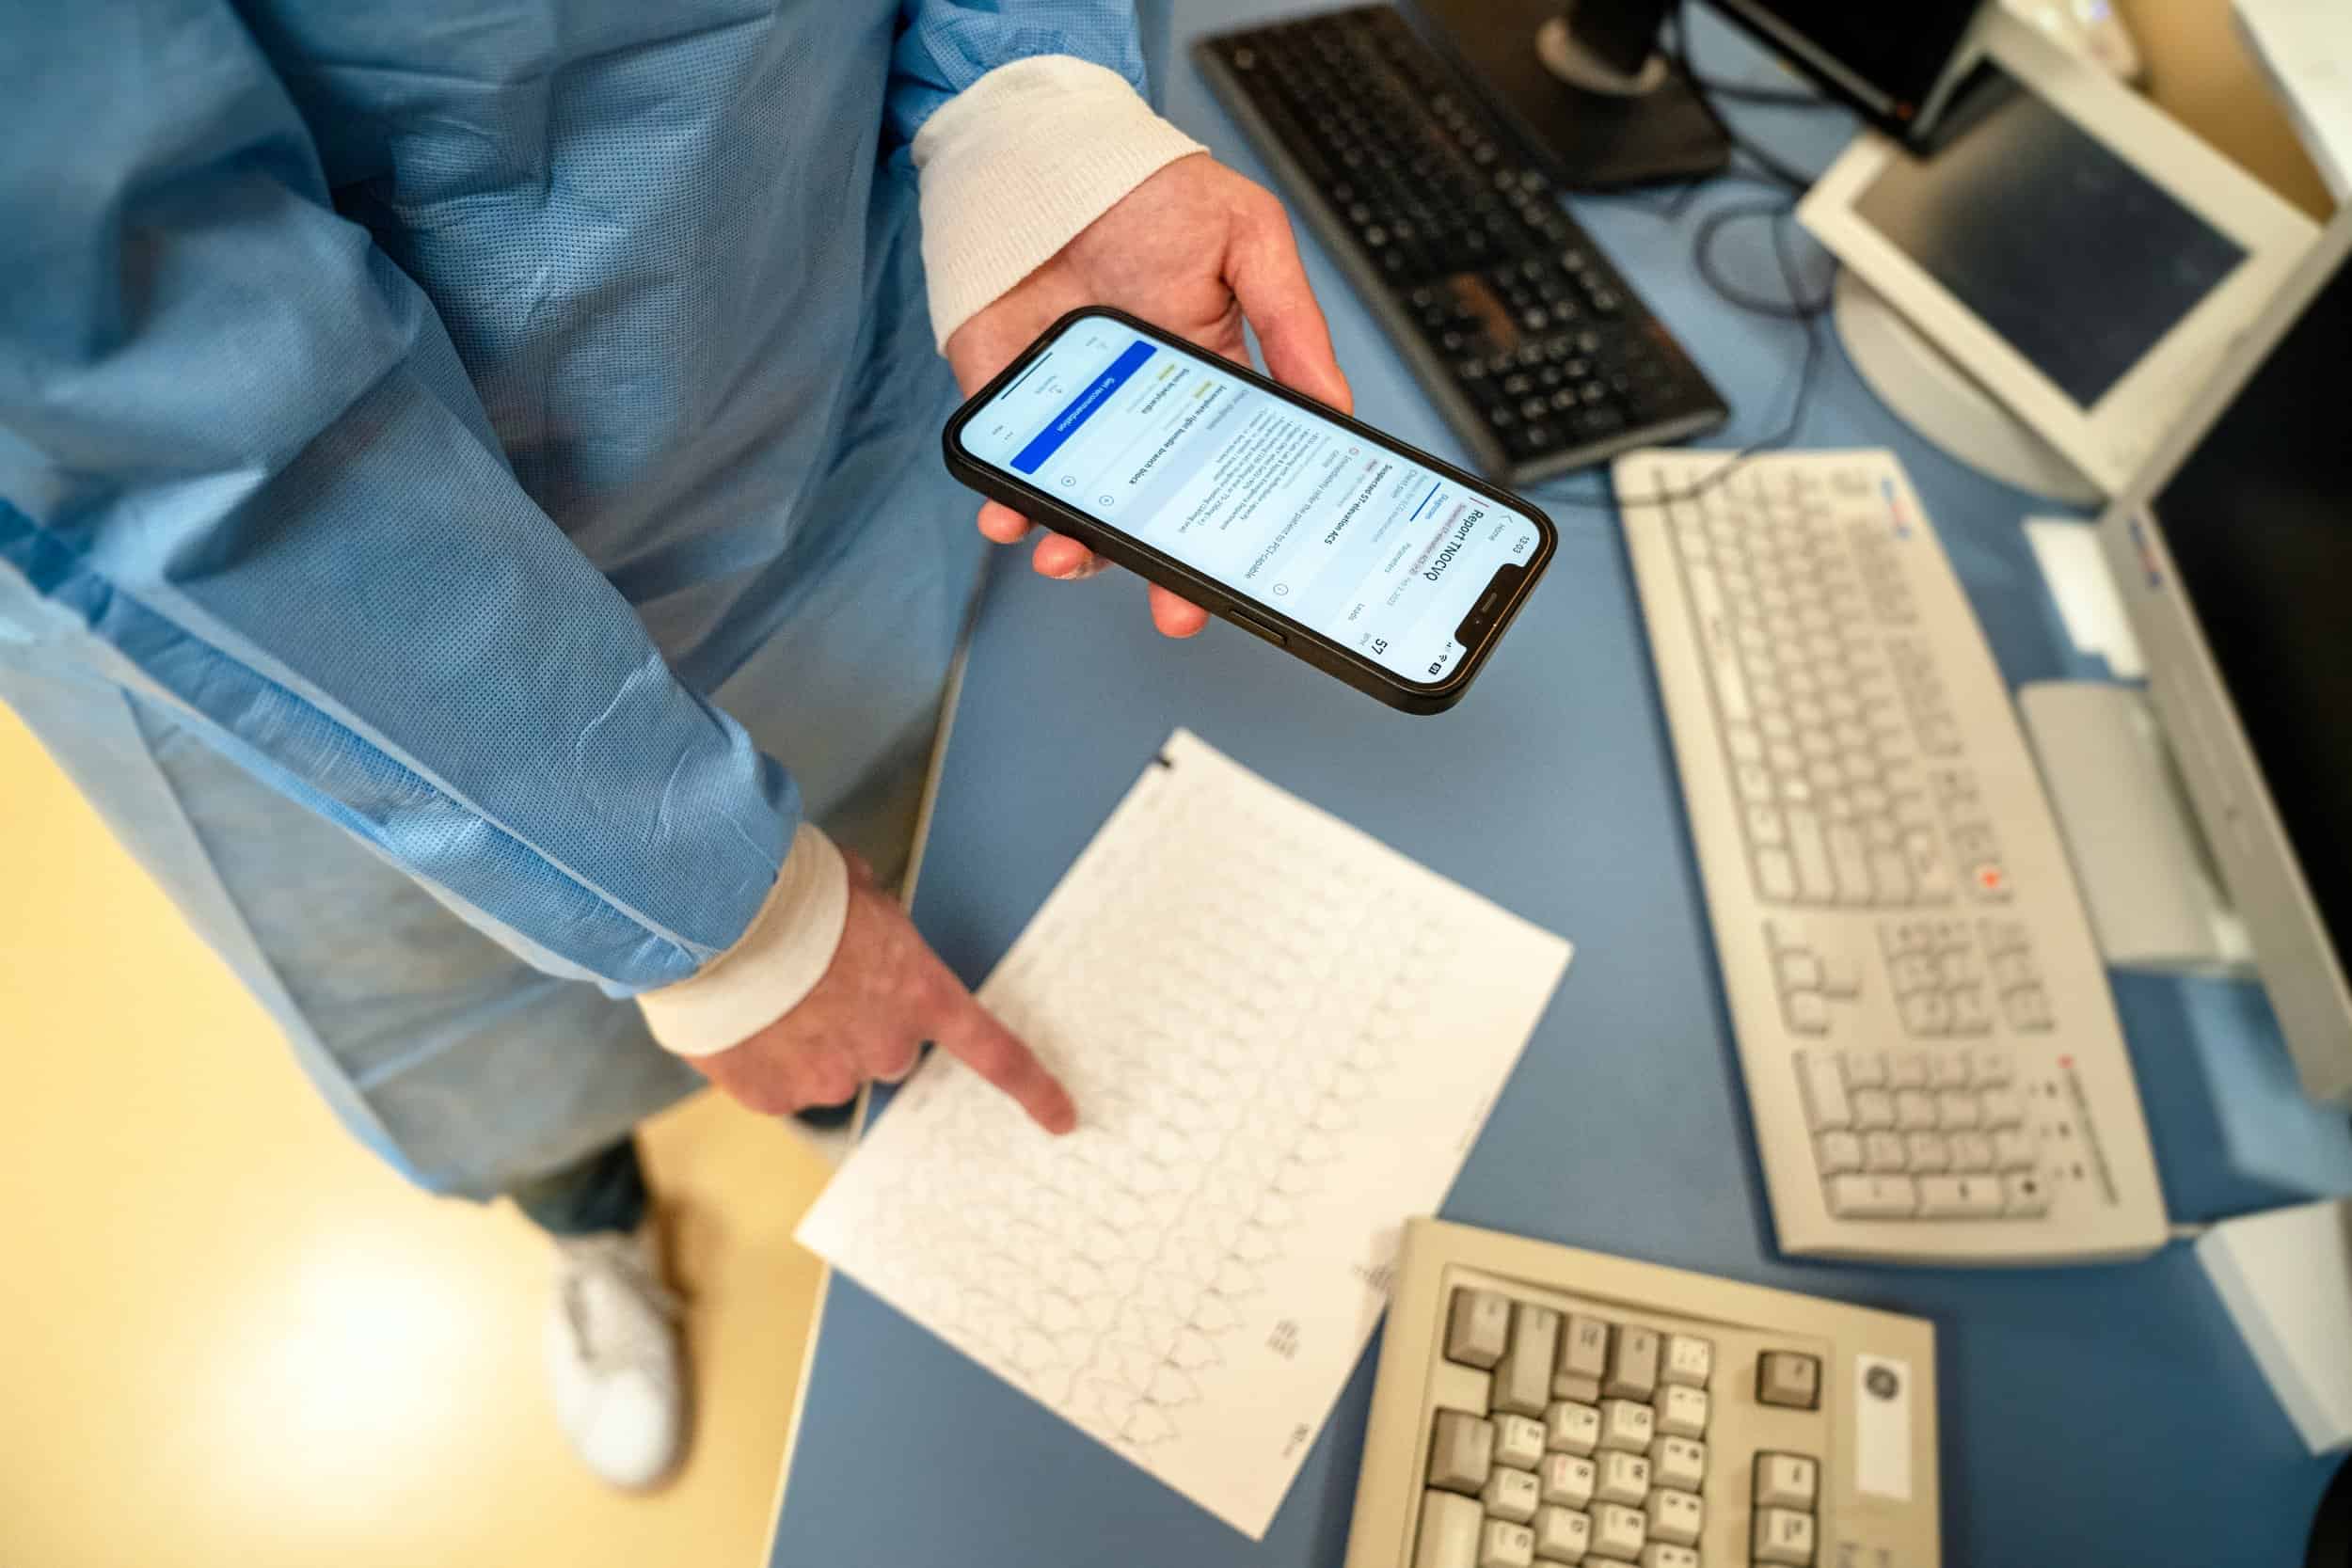 An image of a doctor scanning an ECG with his phone via the PMcardio app